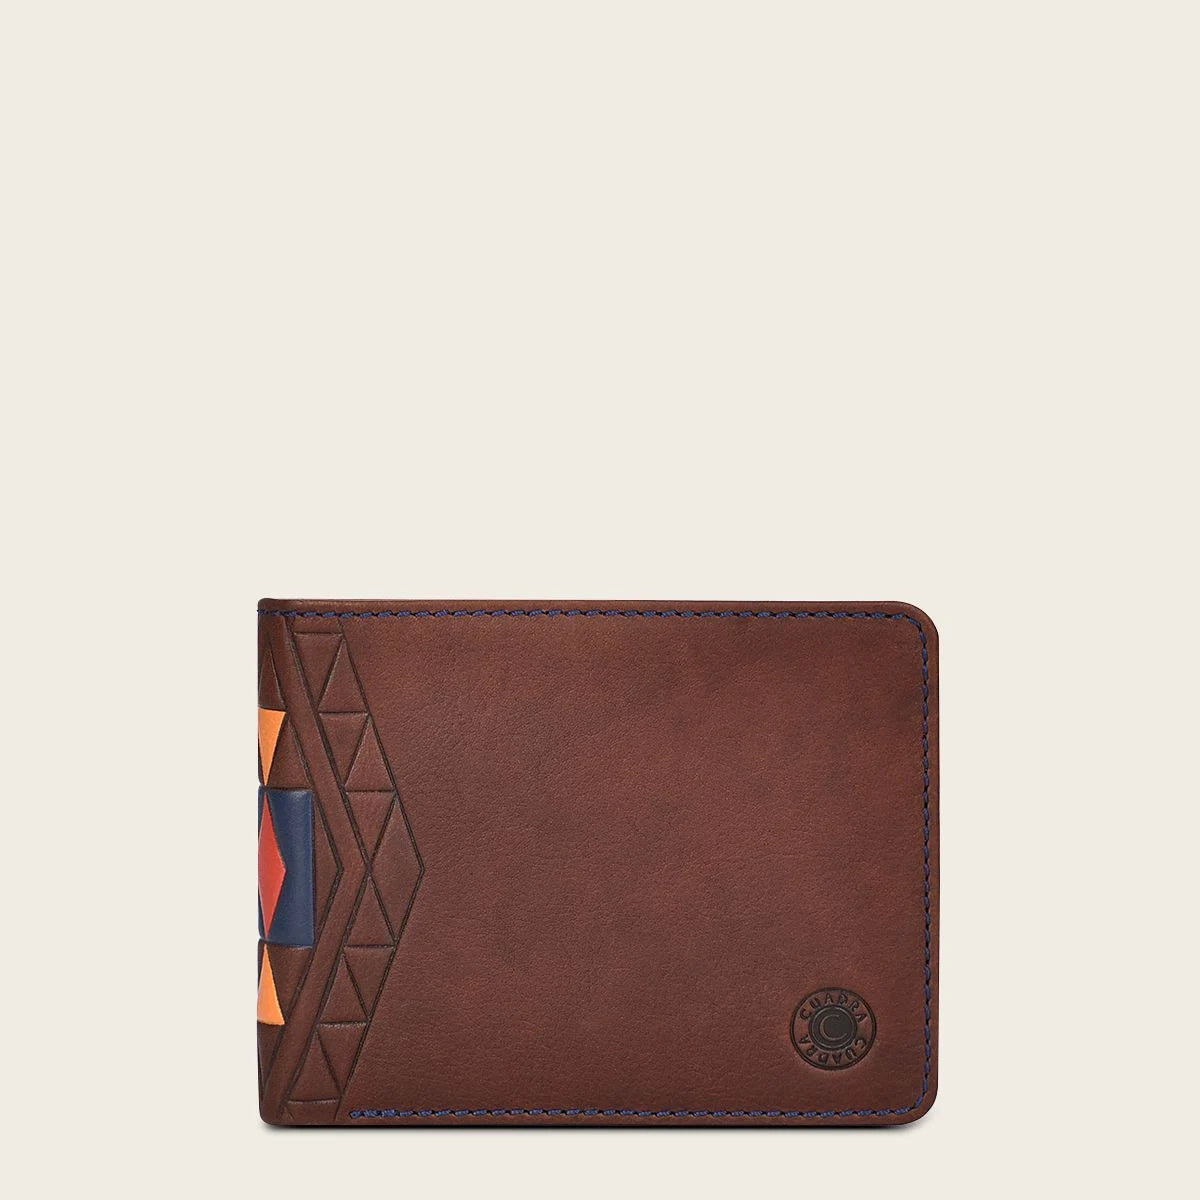 Brown and colored bovine leather wallet